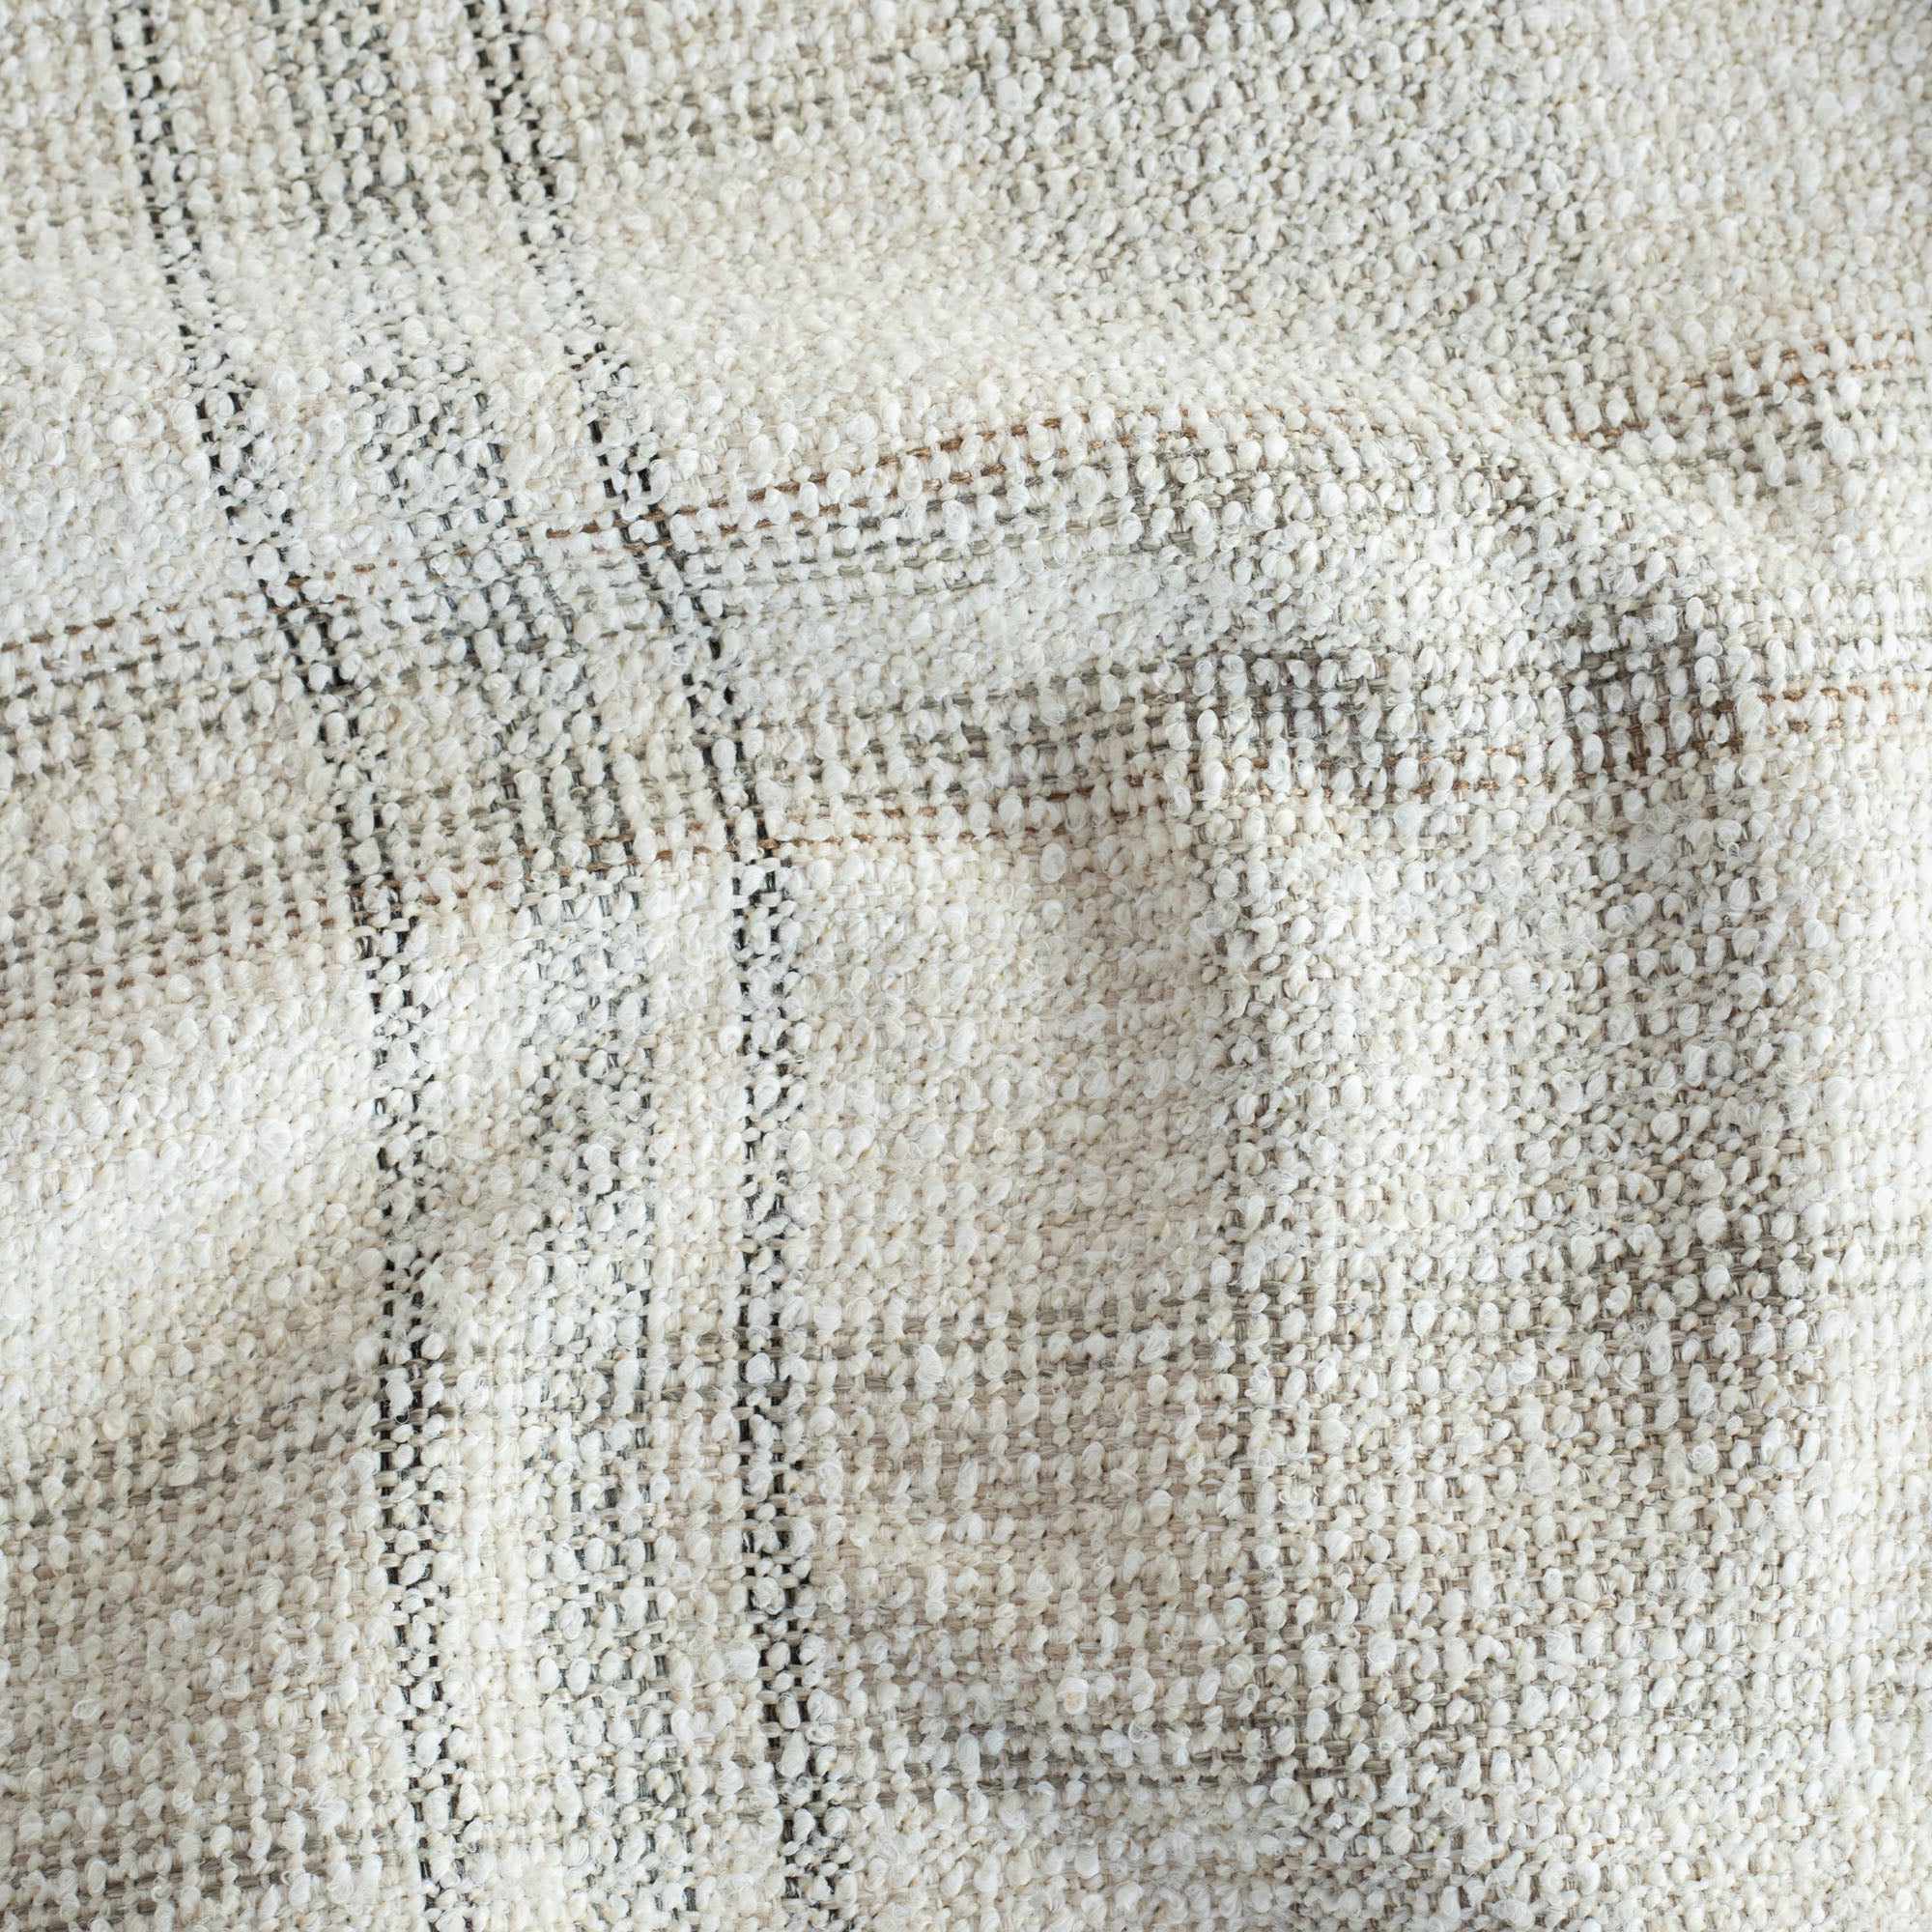 a cream, brown and grey high performance plaid patterned upholstery fabric: close up view